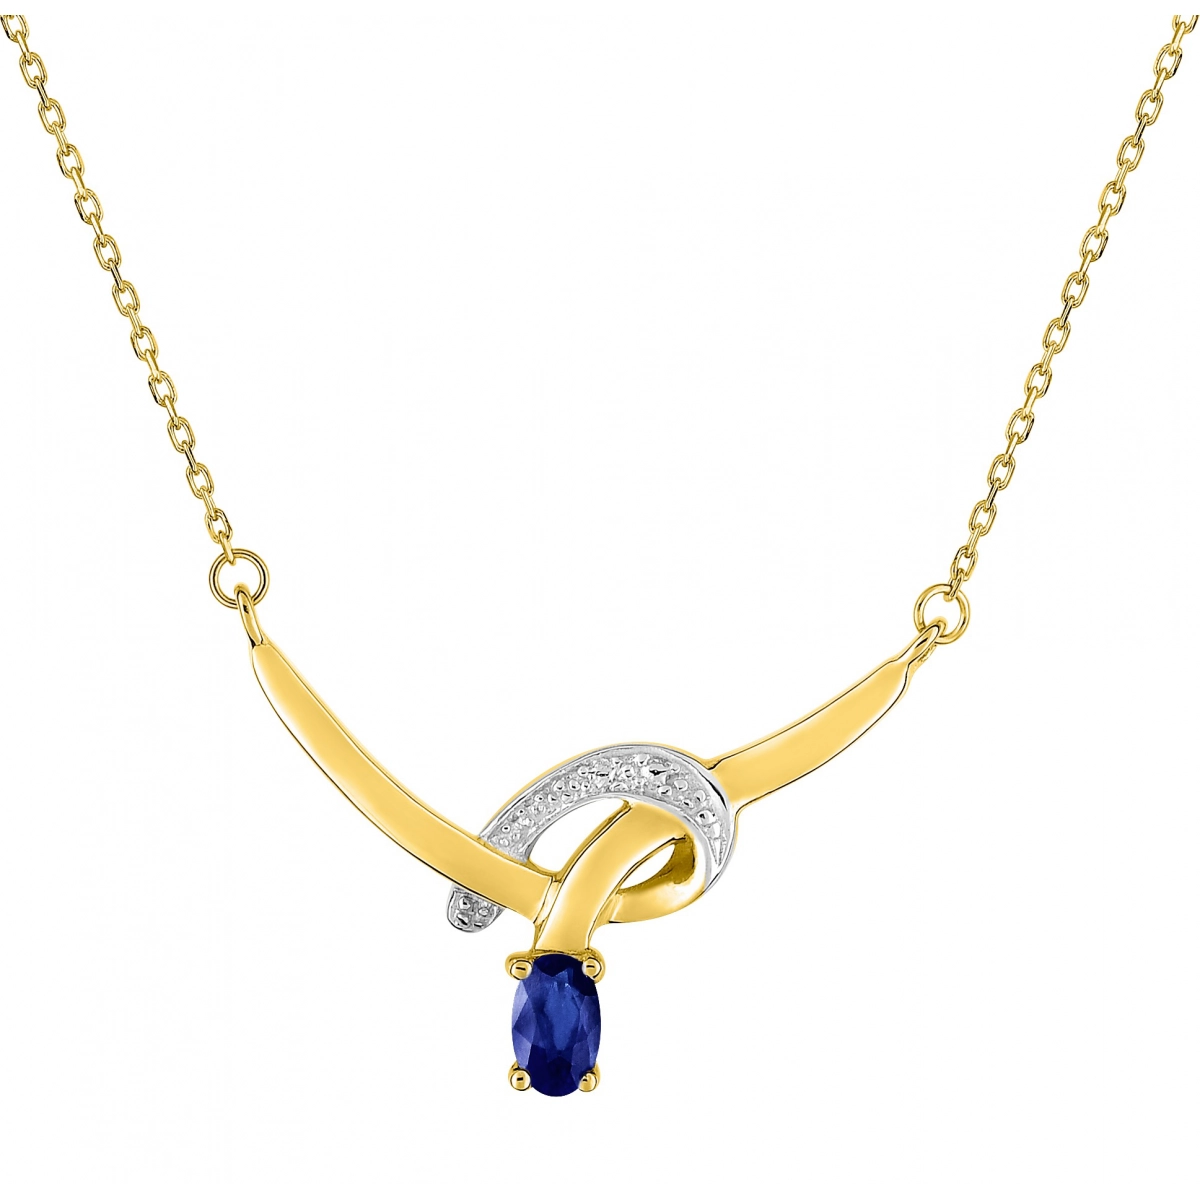 Necklace w. sapphire and rhod 9K YG - Size: 42  Lua Blanca  39303.S3.42